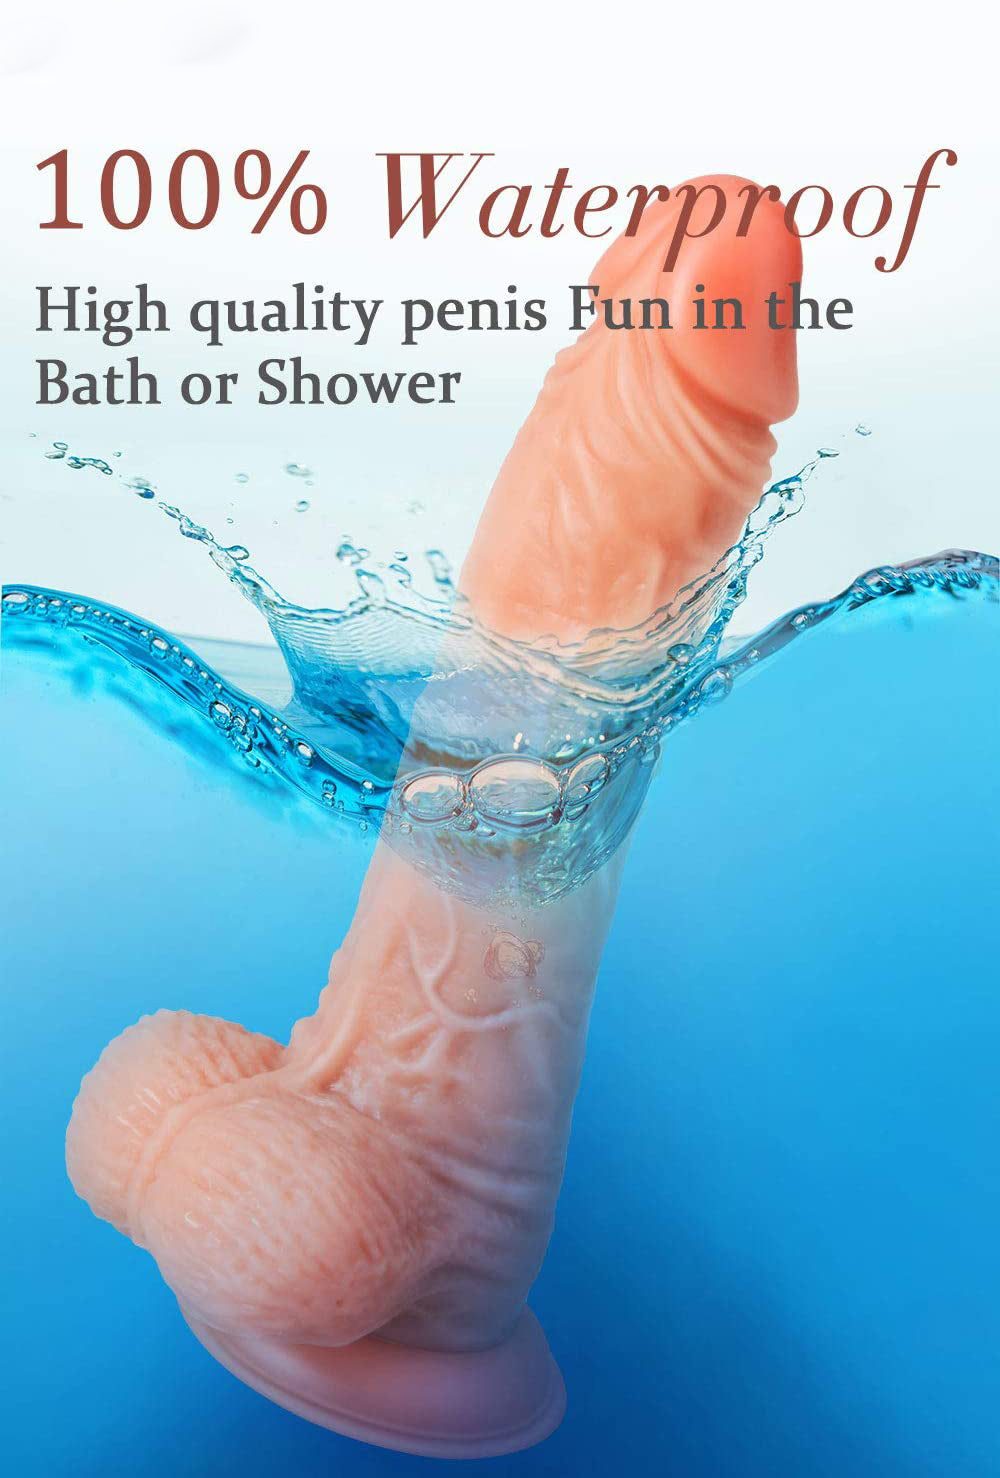 9 Inch Realistic Dildo, Body-Safe Material Lifelike Huge Penis with Strong Suction Cup for Hands-free Play, Flexible Cock with Curved Shaft and Balls for Vaginal G-spot and Anal Play